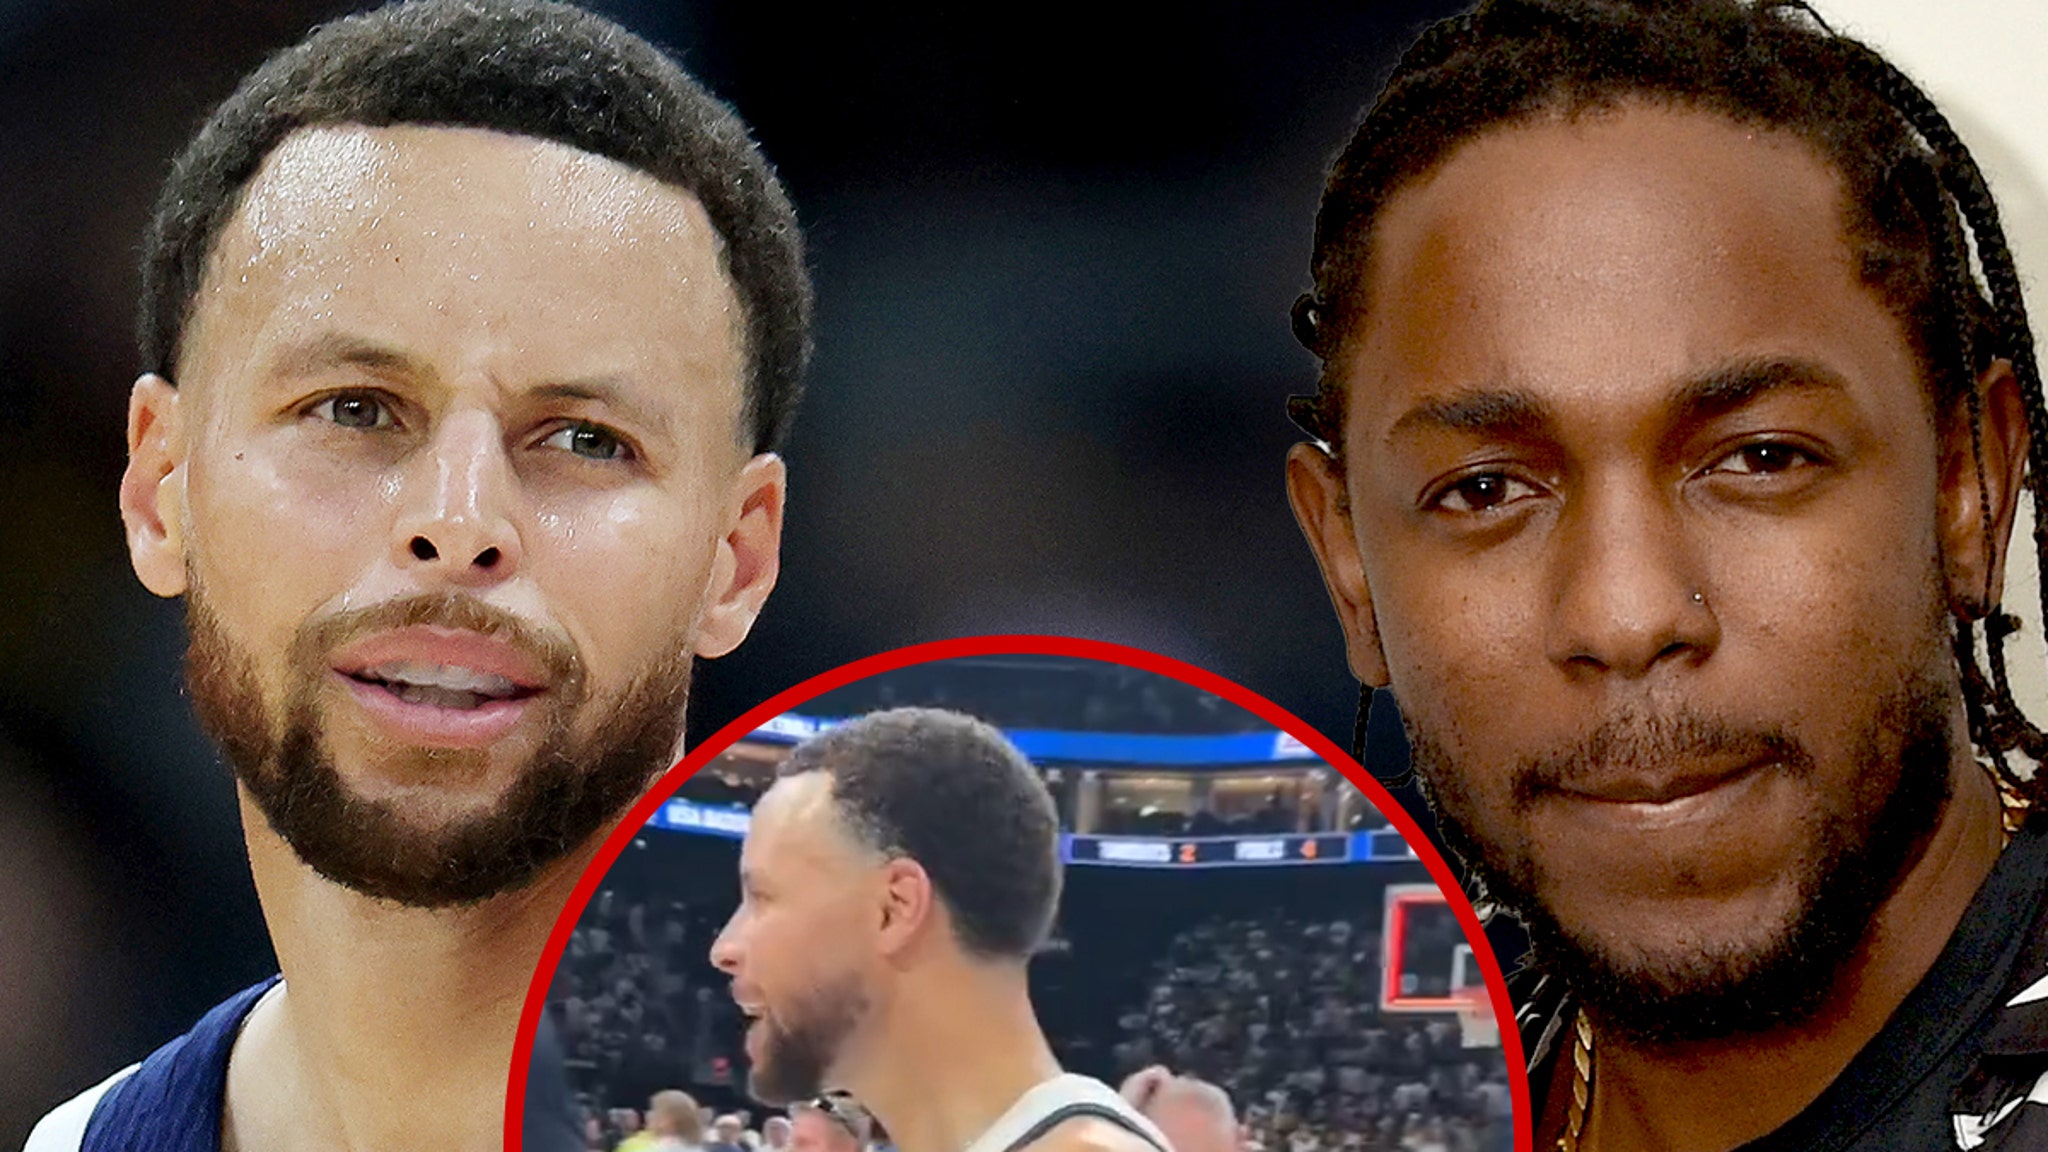 Steph Curry is tired of hearing Kendrick’s “Not Like Us” and “Damn that song!”